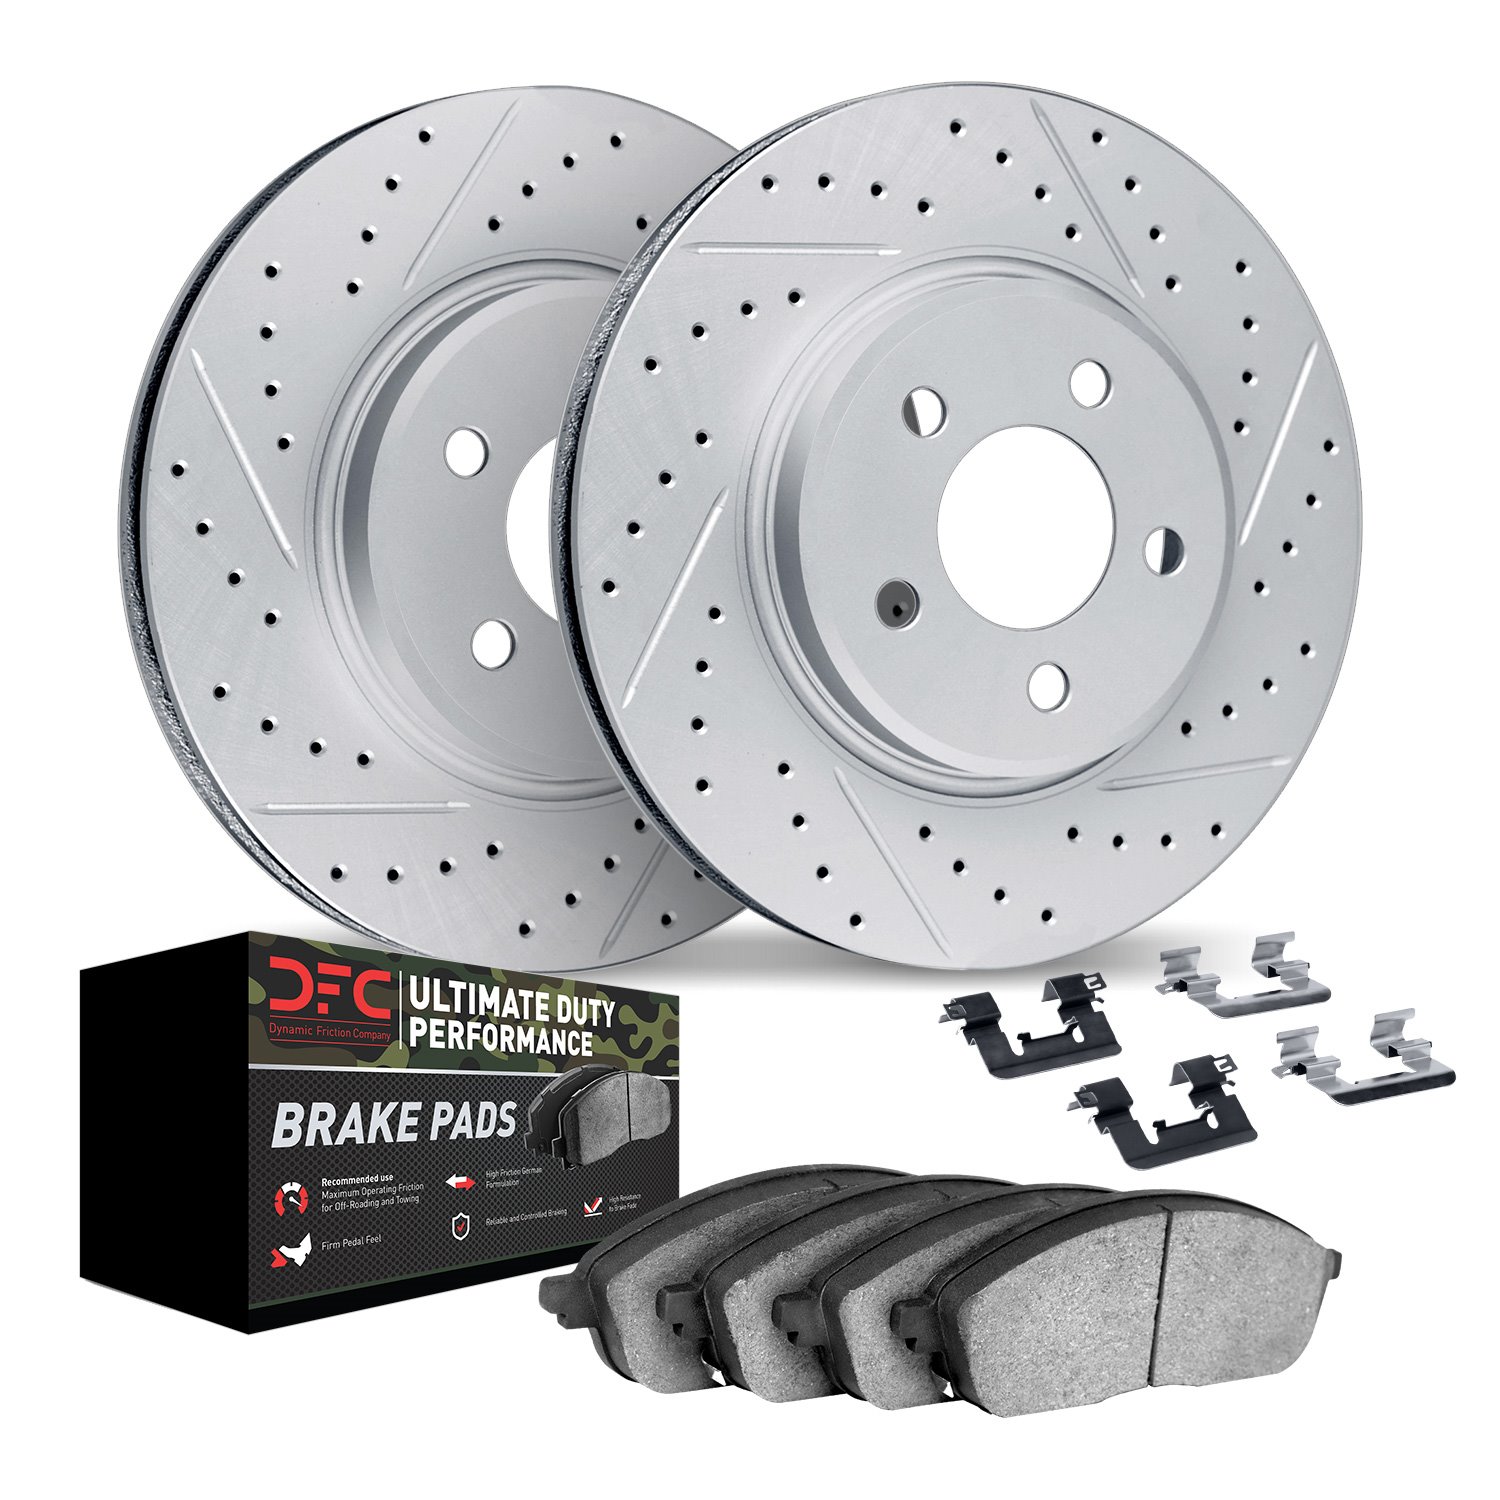 2412-54013 Geoperformance Drilled/Slotted Brake Rotors with Ultimate-Duty Brake Pads Kit & Hardware, 2003-2011 Ford/Lincoln/Merc